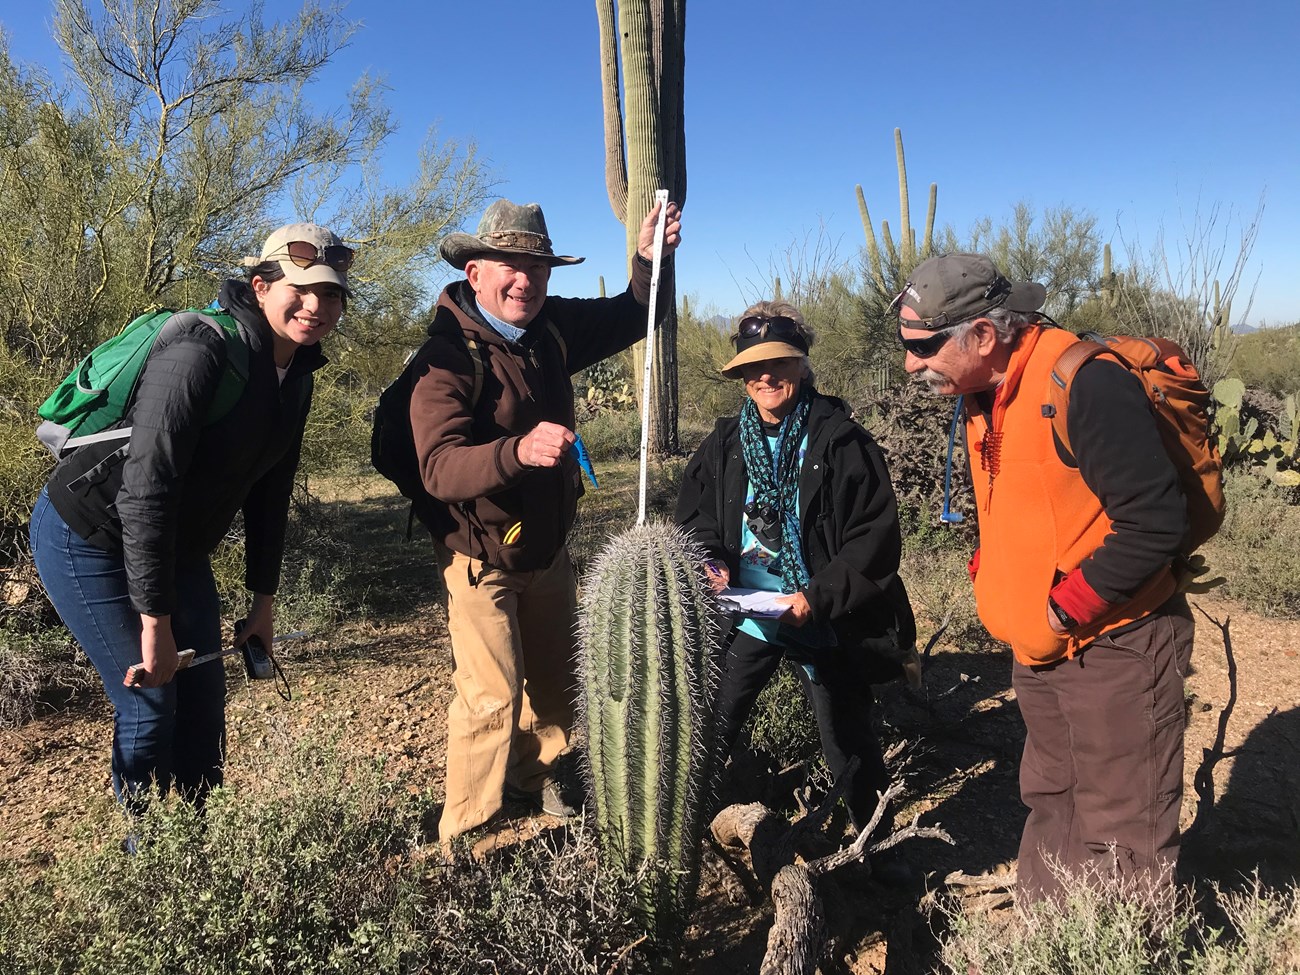 Volunteers smiling for a photo. In front of them is a short saguaro.